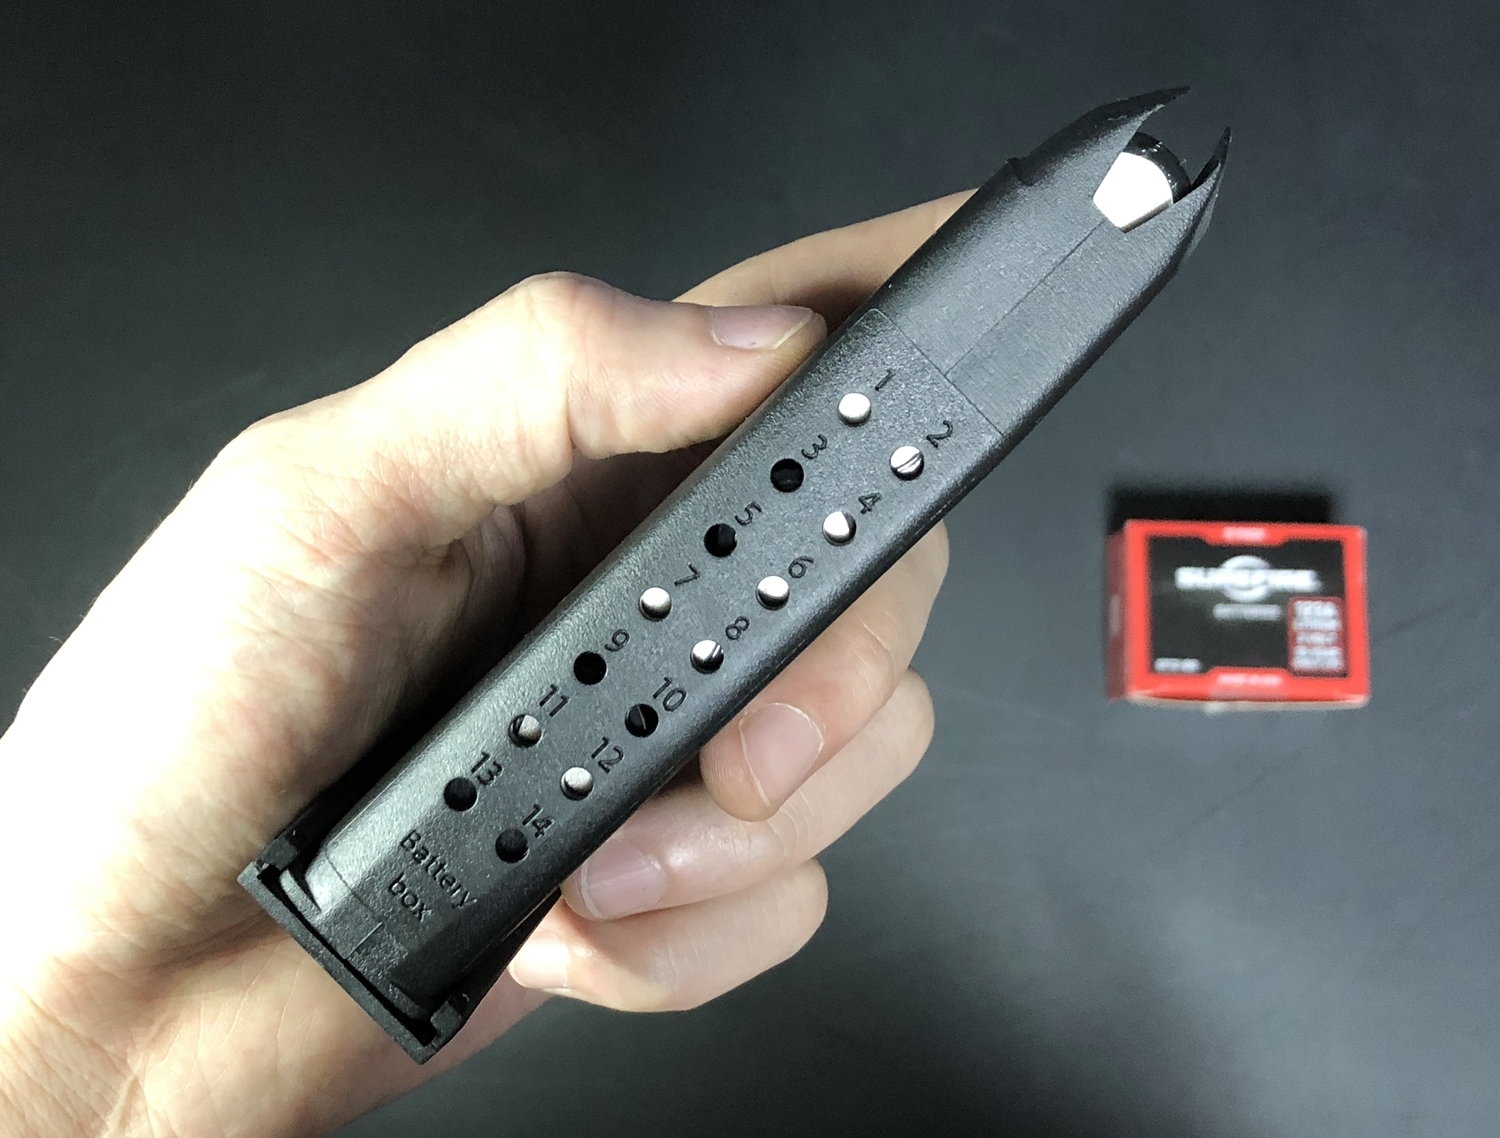 10 TMC GLOCK MAGAZINE STYLE CR123A BATTERY CASE グロック マガジン スタイル 電池ケース SUREFIRE SF123A 純正電池!! 購入 開封 取付 レビュー!!